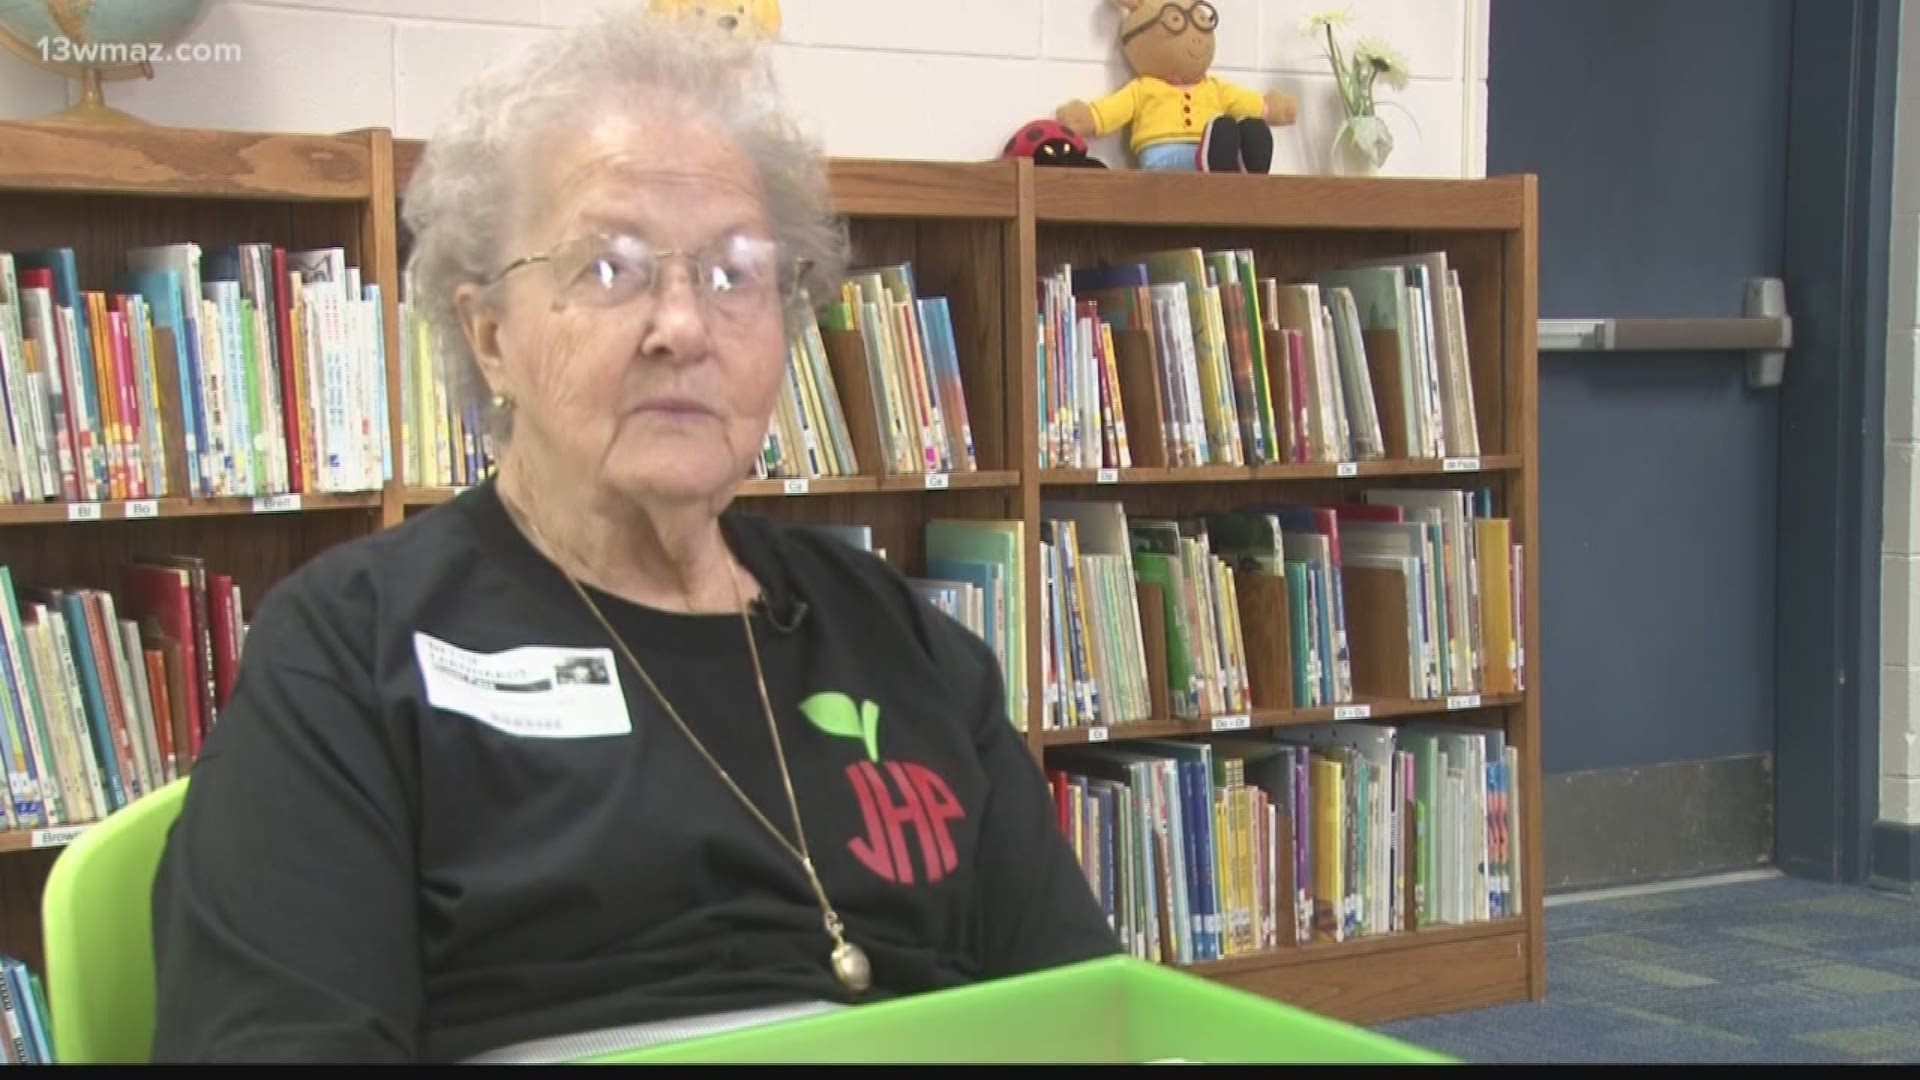 84-year-old woman teaches kids how to read